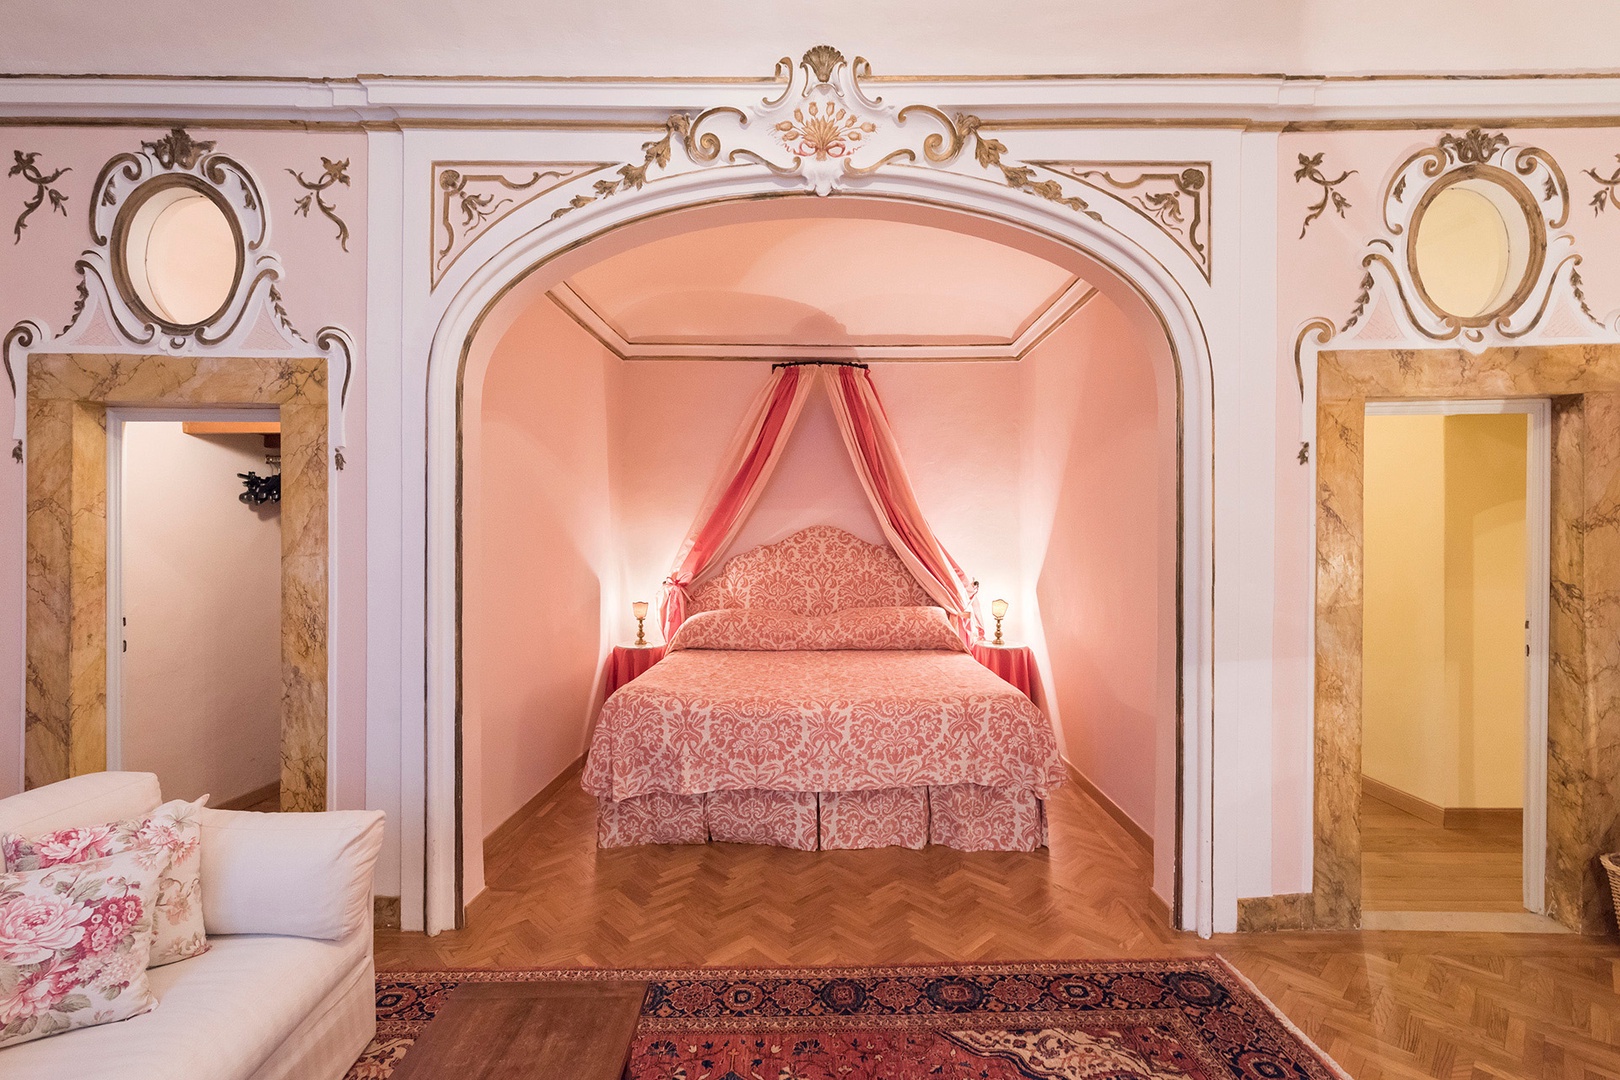 The namesake 'alcove' in regal bedroom 2. Bed can be prepared together or as two beds.